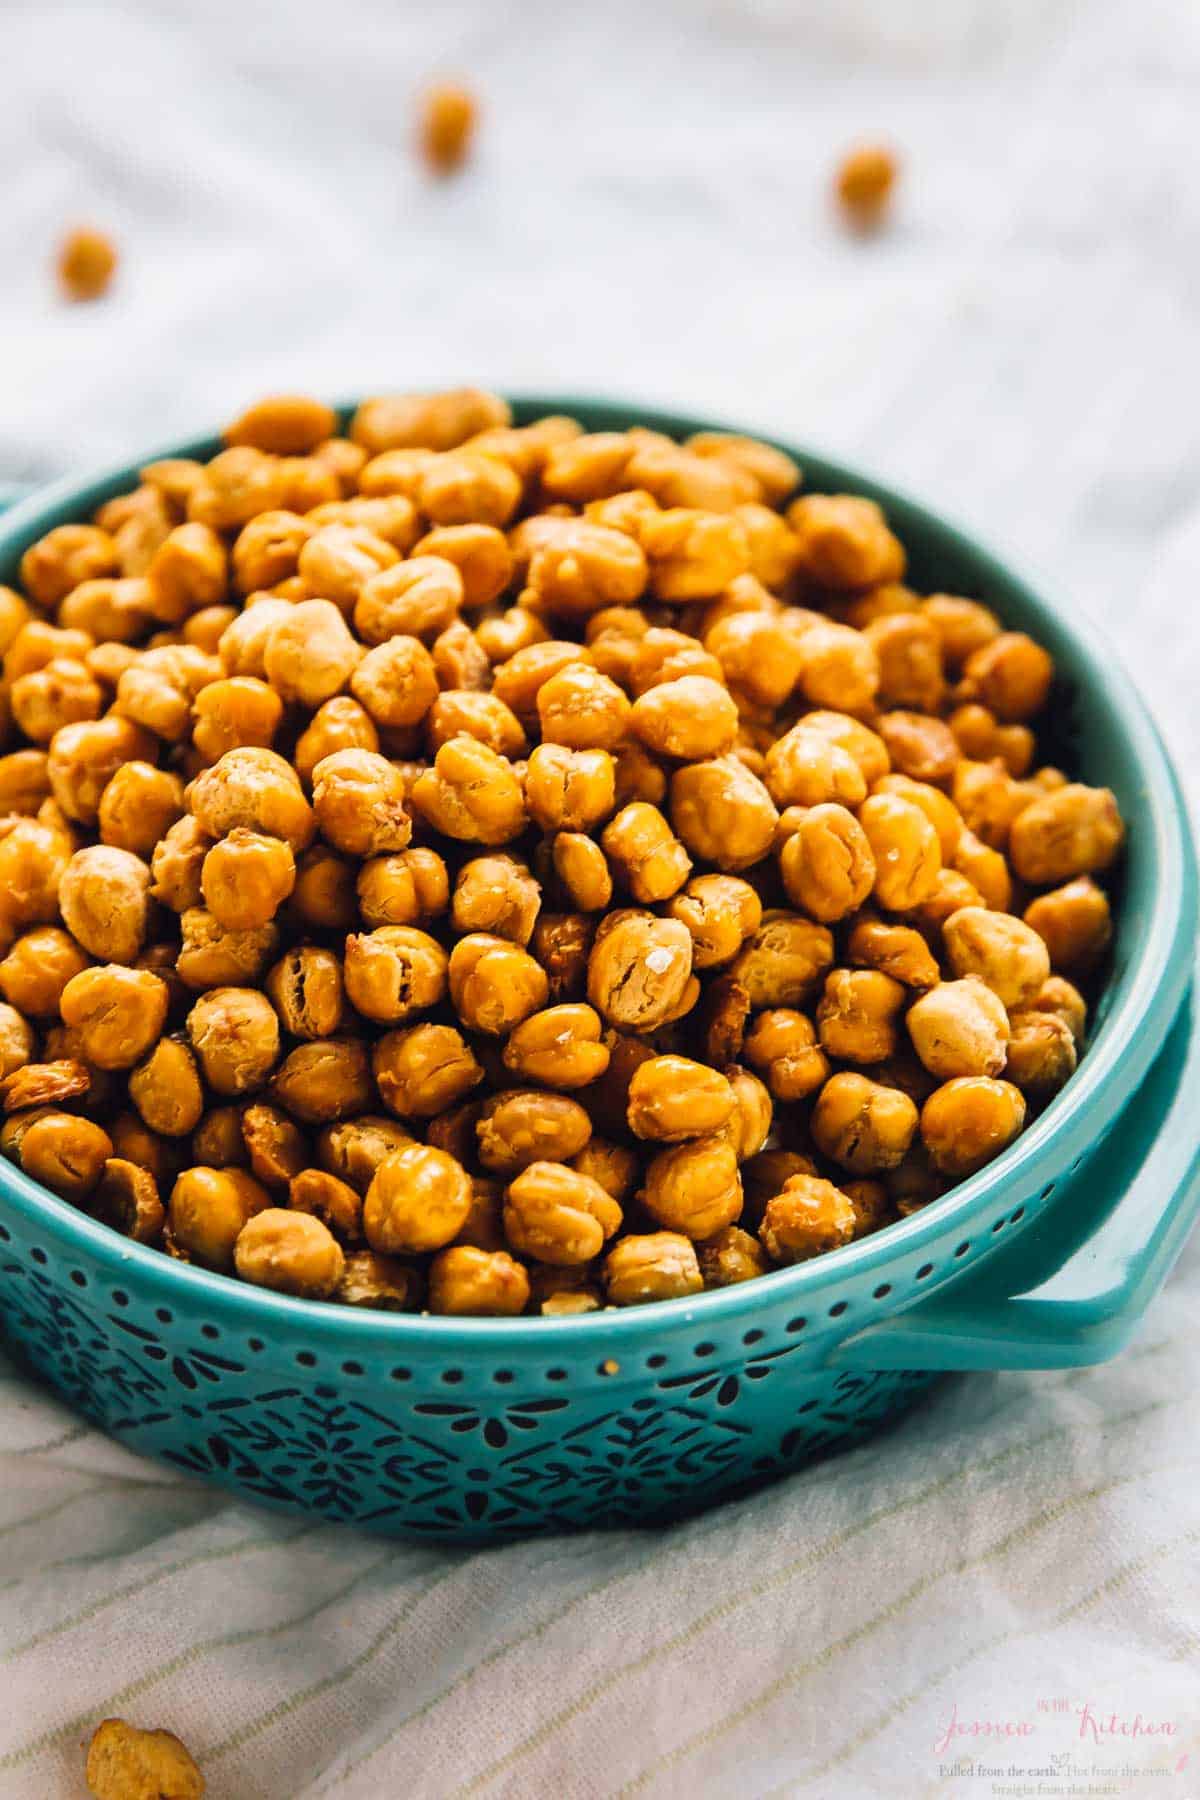 Large bowl of roasted chickpeas